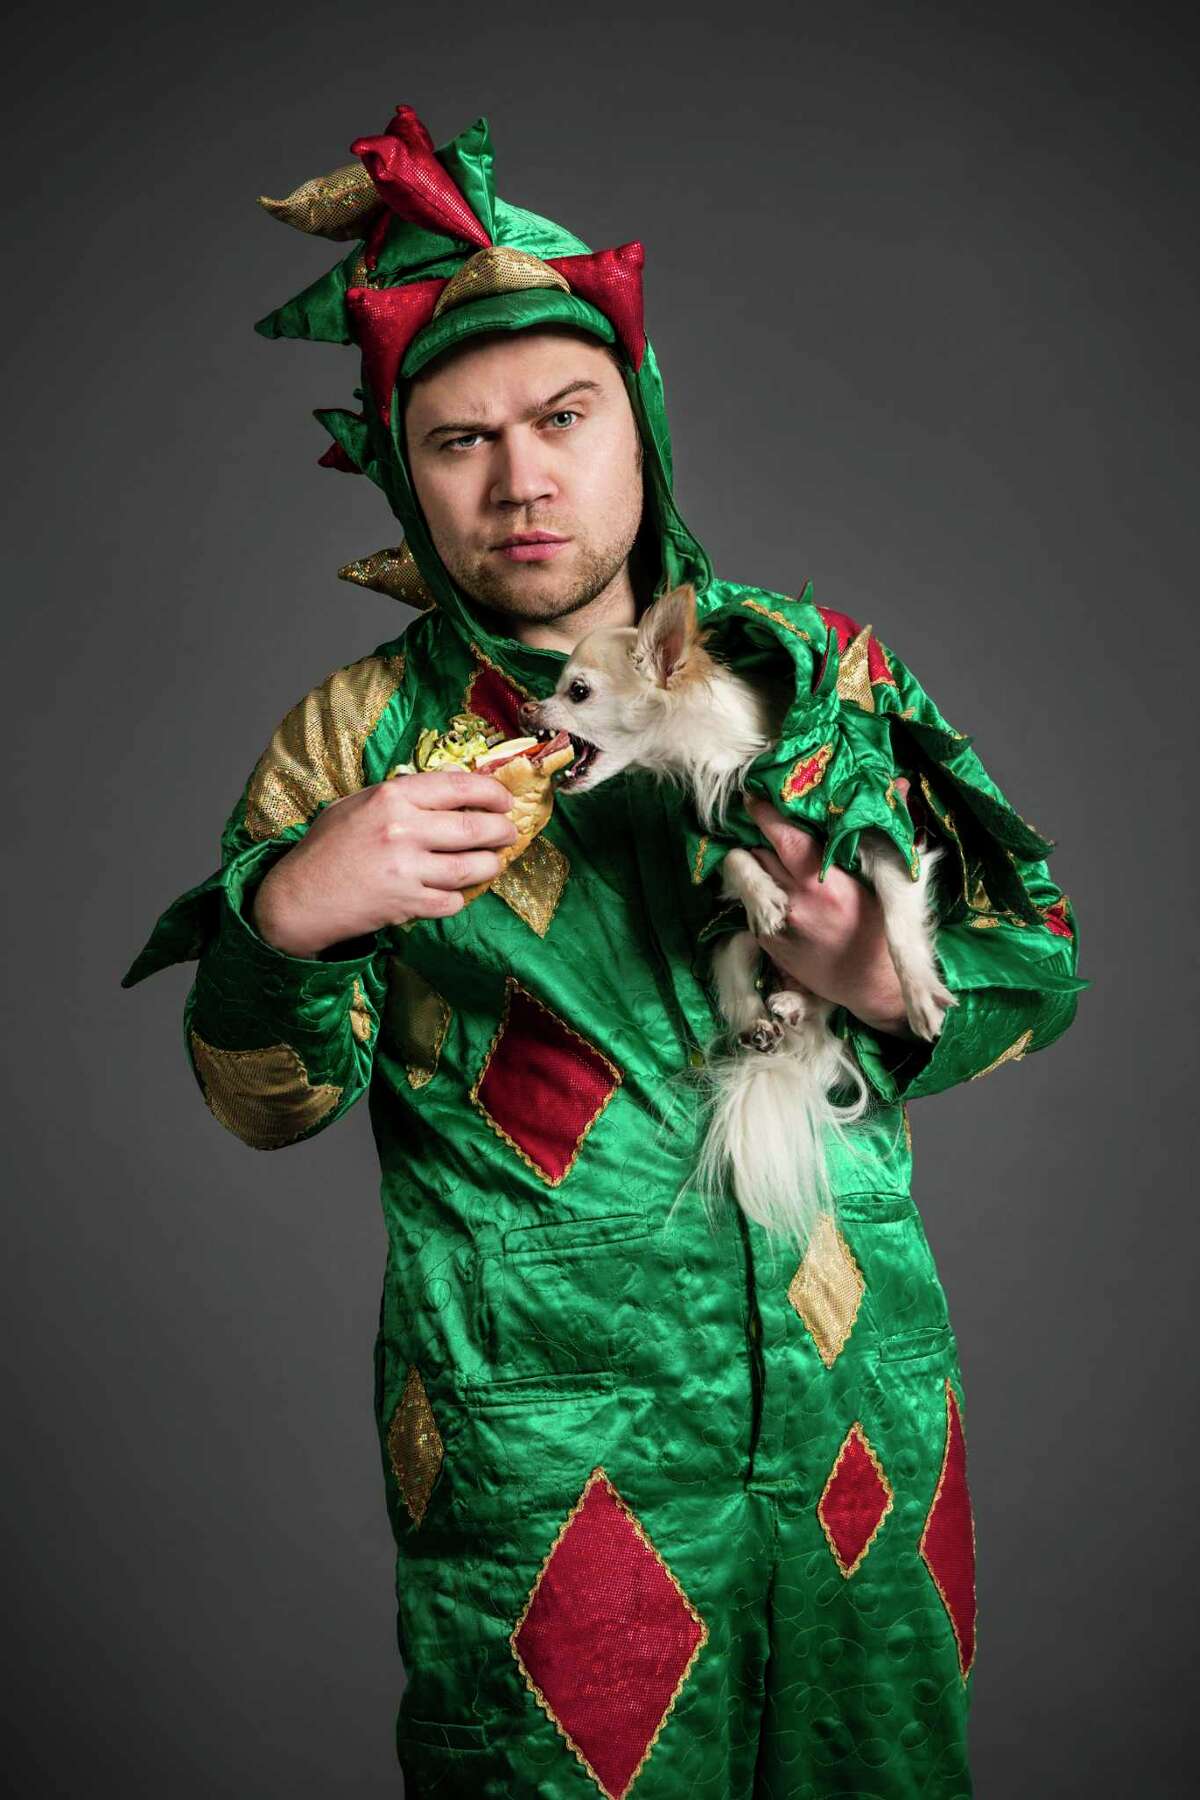 Piff the Magic Dragon, who sold out two shows at The Playhouse in 2015, and his chihuahua sidekick Mr. Piffles, will be at The Ridgefield Playhouse for two shows of magic tricks and comedy on Jan. 18.